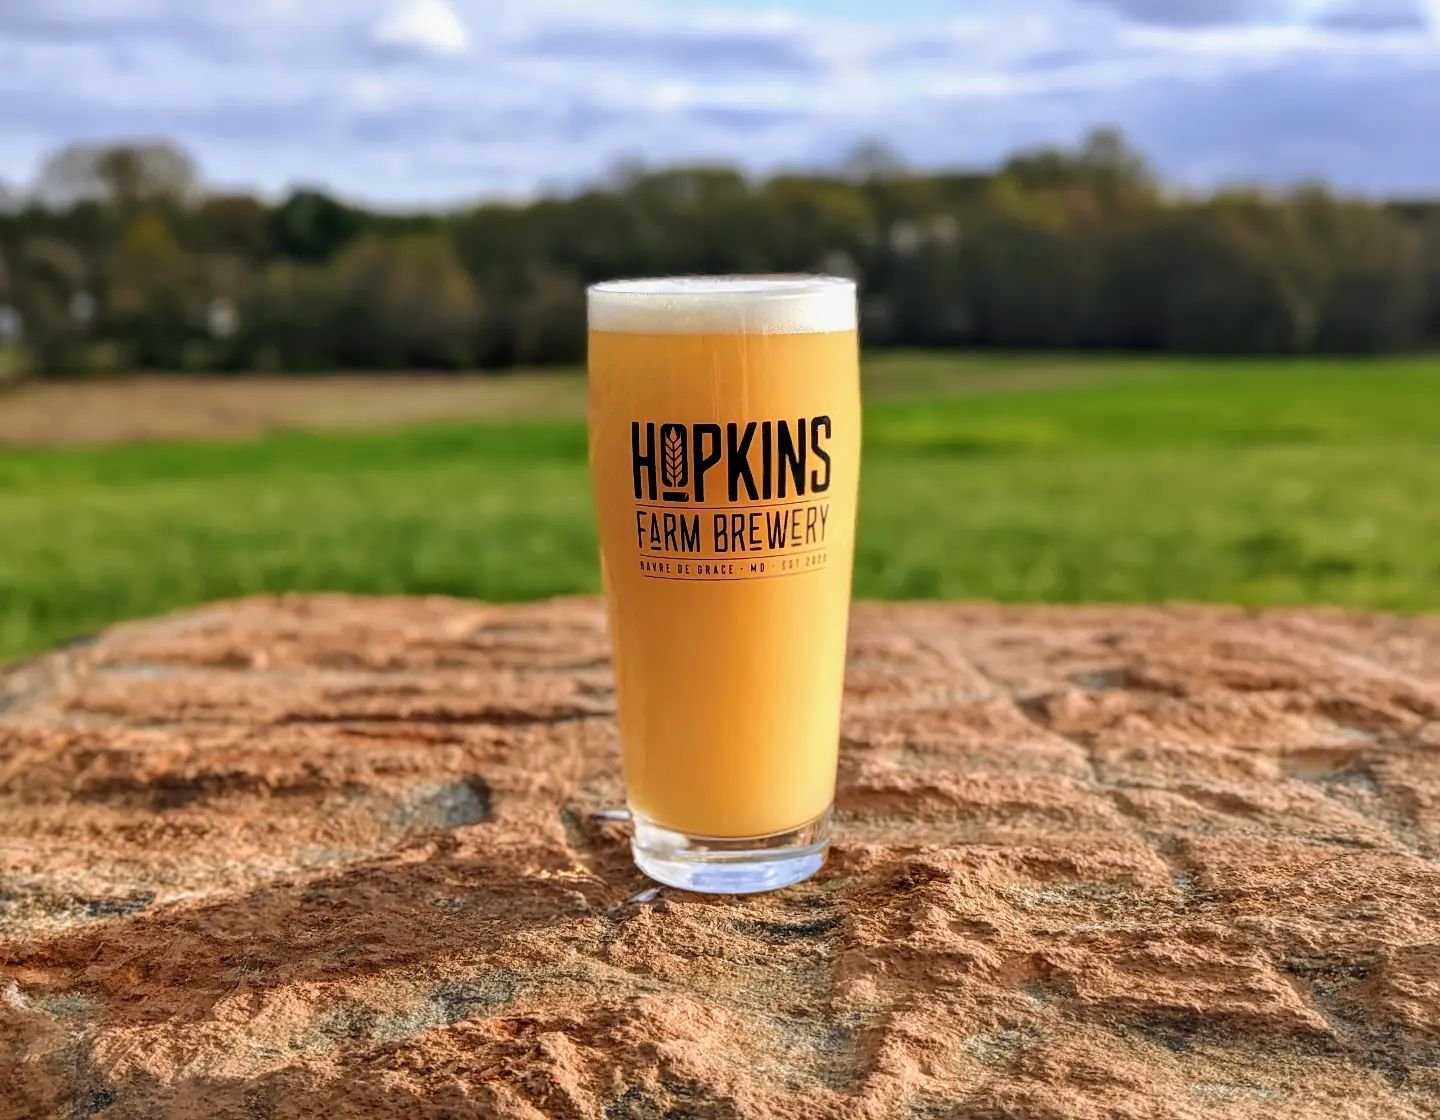 It's going to be a beautiful day to enjoy a cold beer outside on the farm!

@CrossroadsBistro and @thepitshack will be here at 12PM and live music with Boxturtle Bob starts at 2PM!